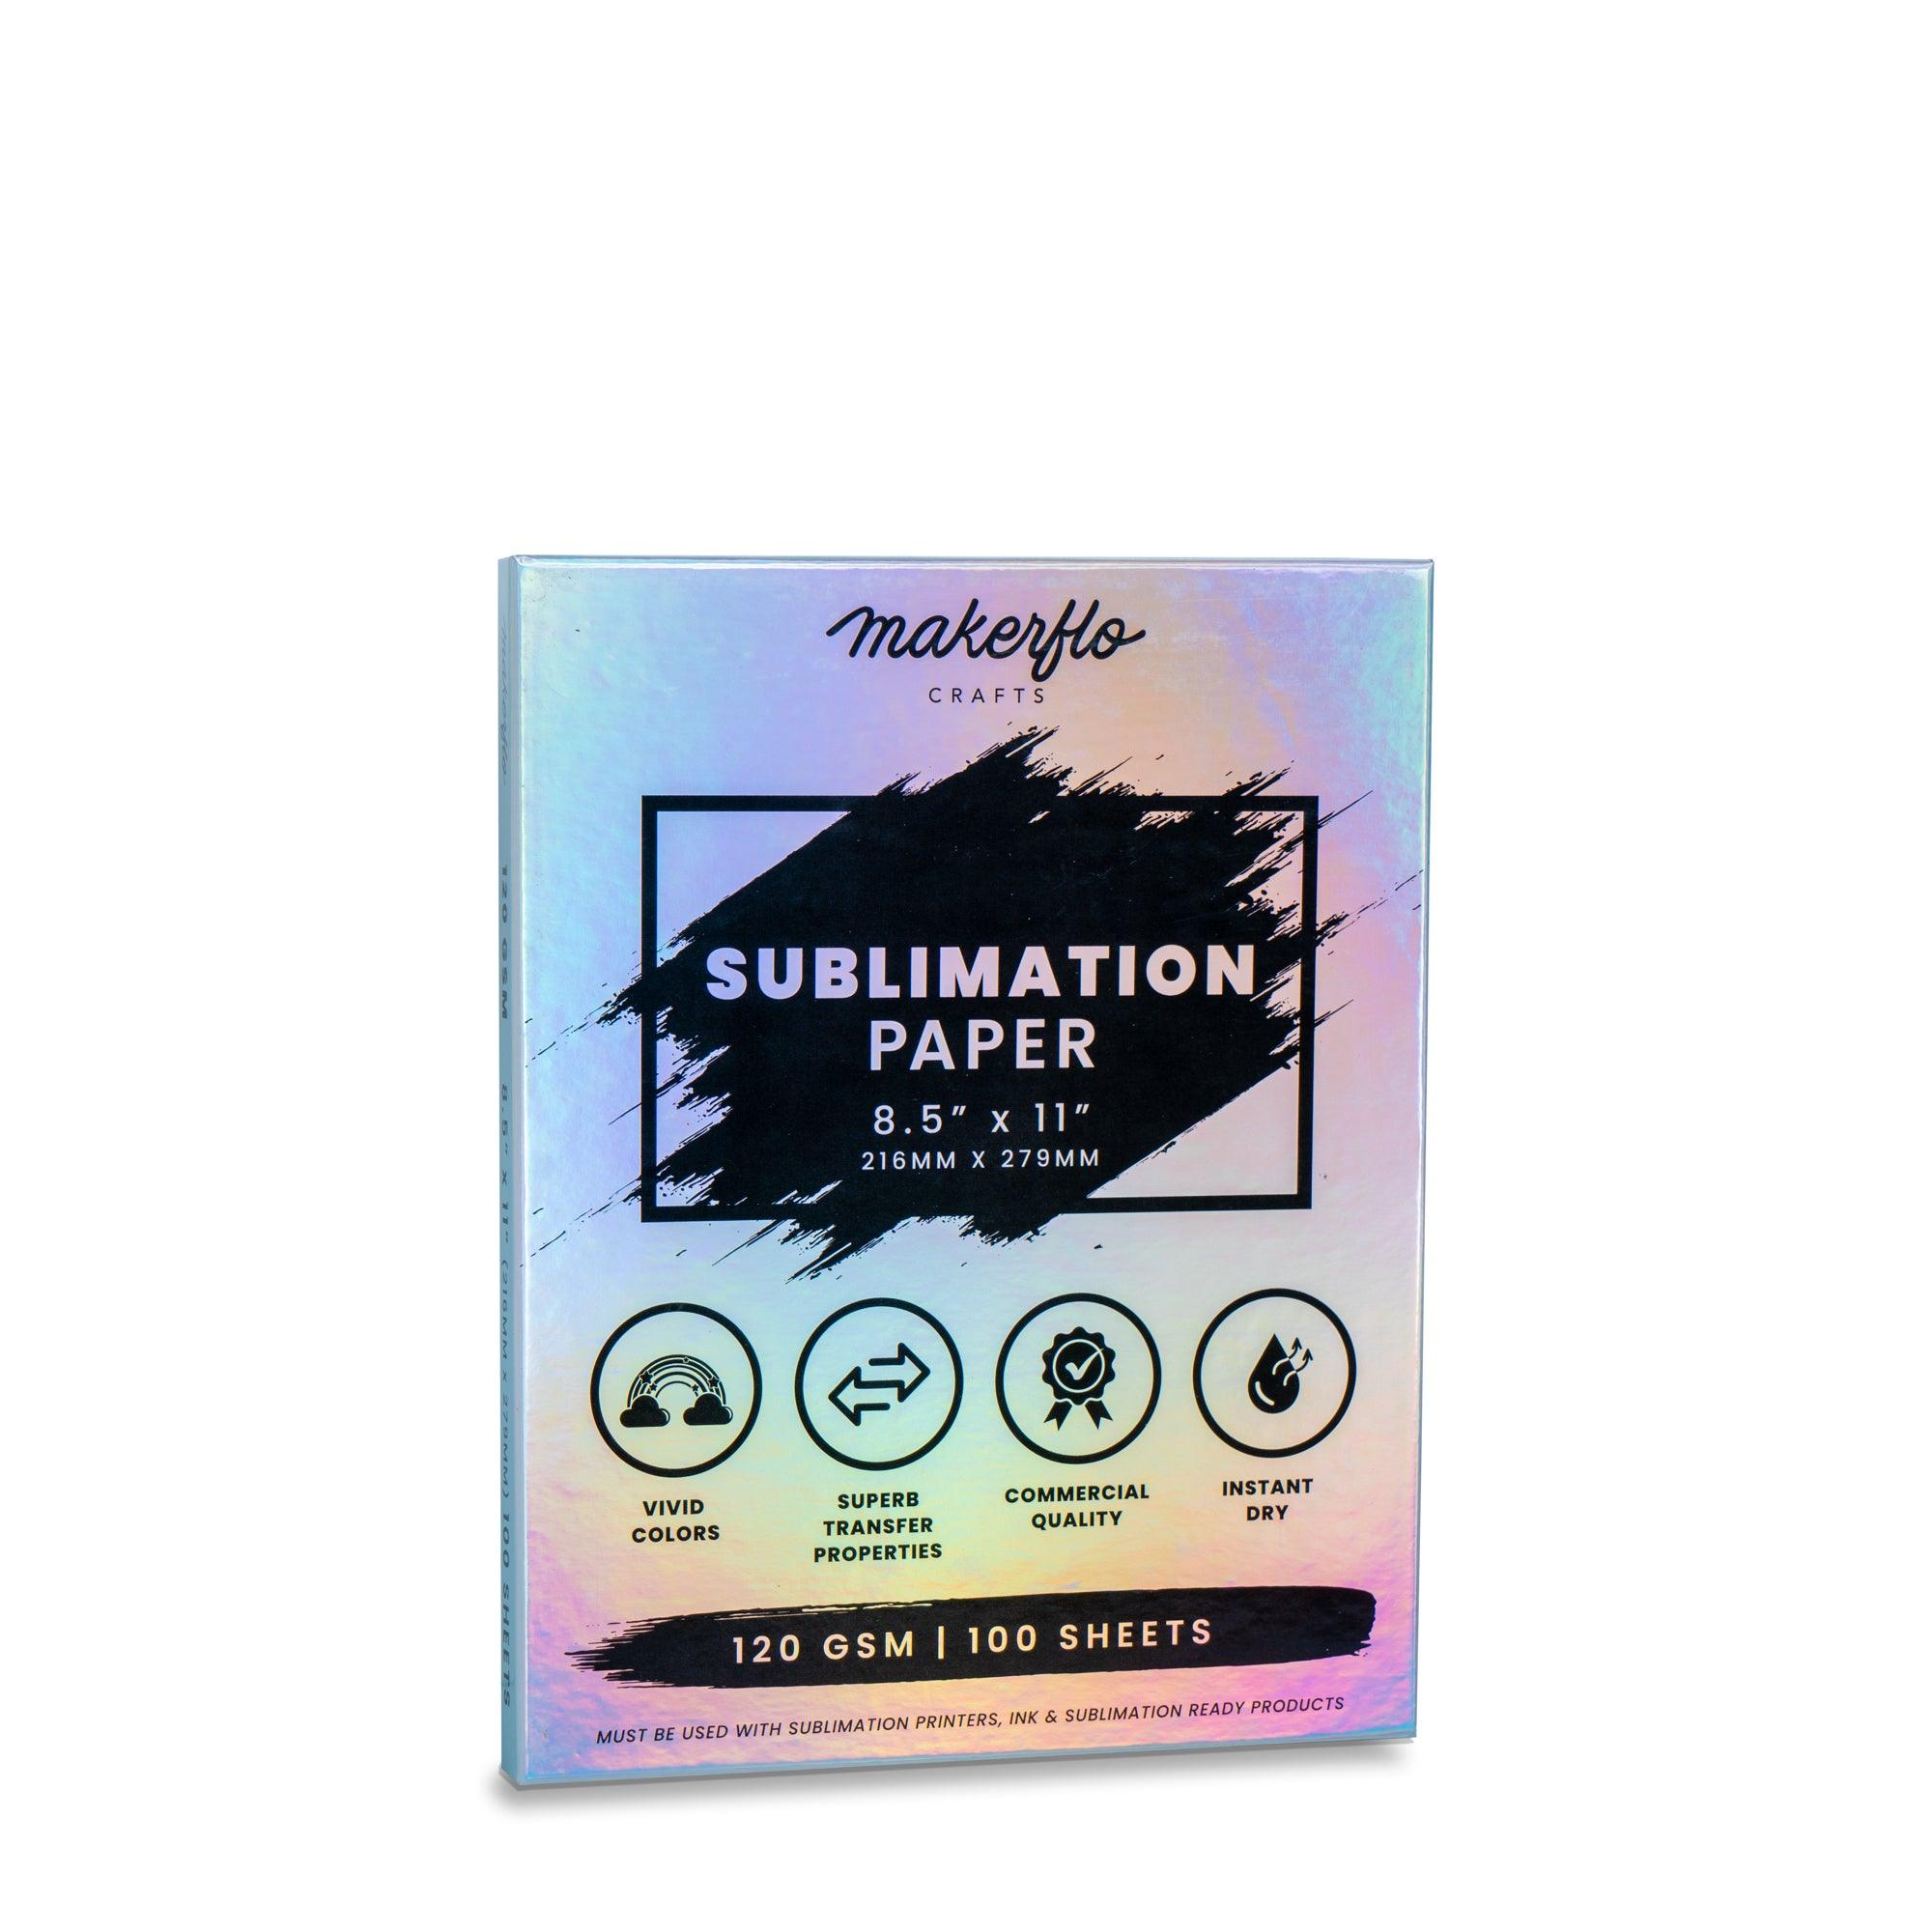 MakerFlo Crafts Sublimation Paper, Pack of 100 Sheets (8.5x11)